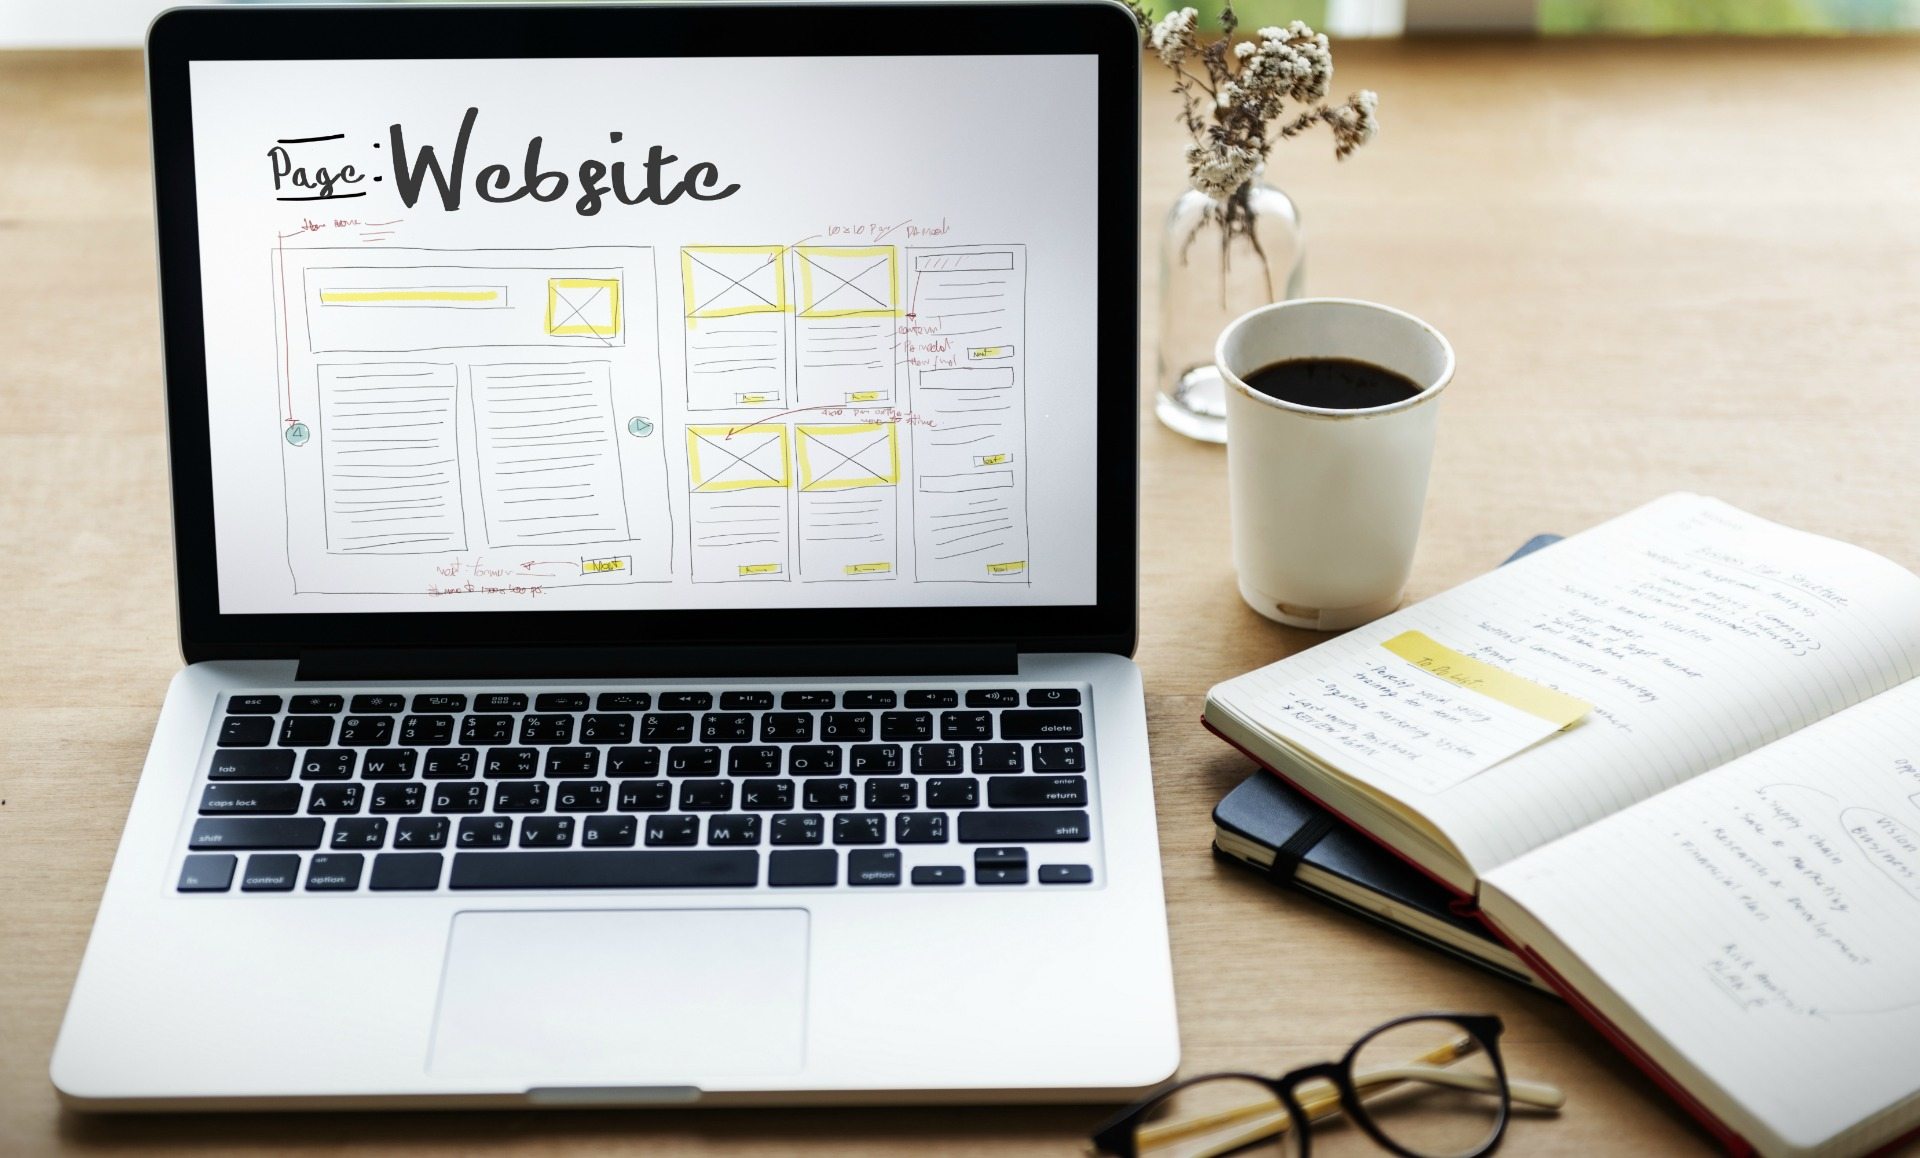 5 reasons why your website should be at the top of your priority list